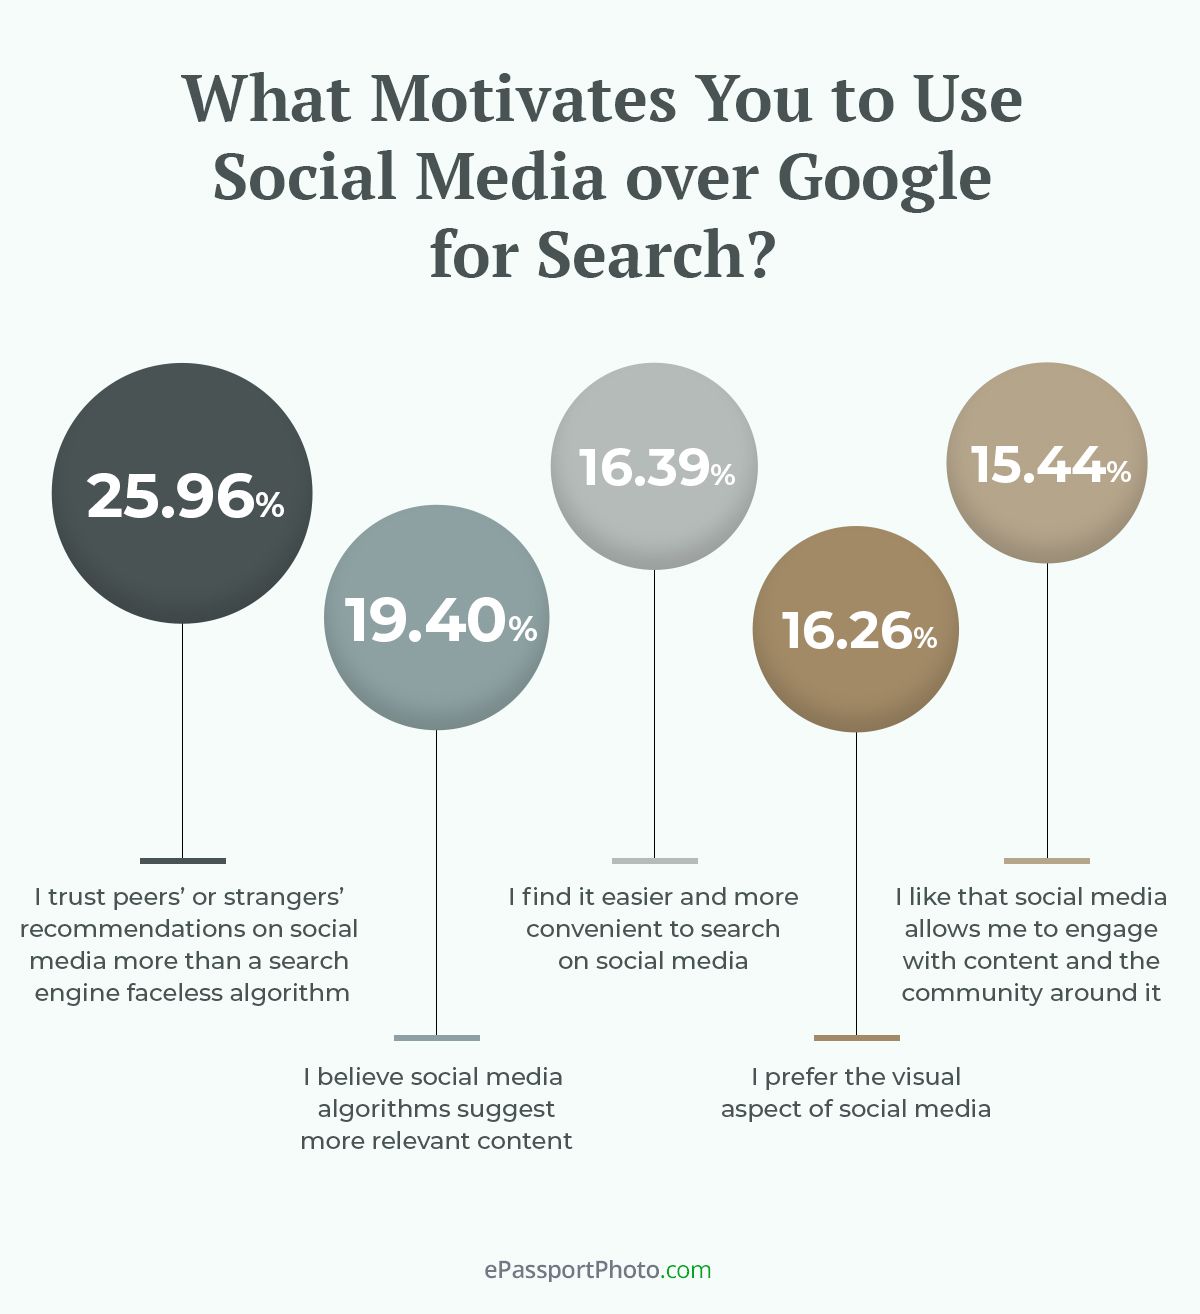 I trust peers’ or strangers’ recommendations on social media more than a search engine faceless algorithm” was the most commonly cited reason